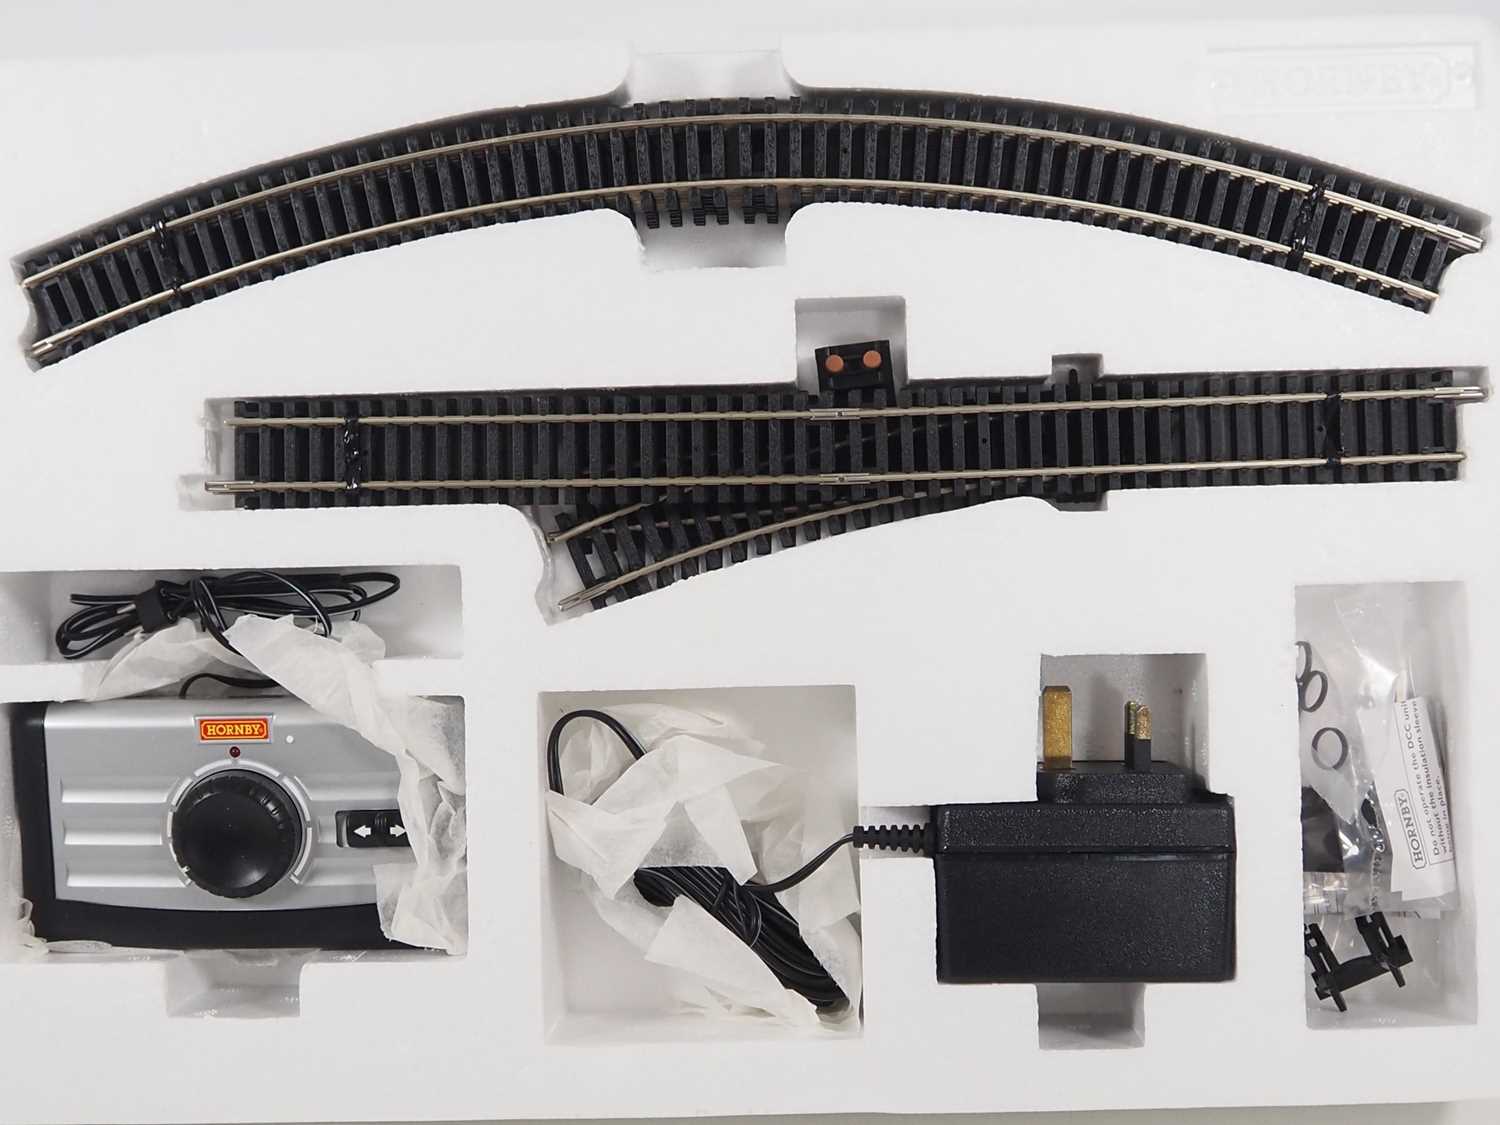 A HORNBY R1134 OO gauge 'Virgin Trains Pendolino' train set comprising a 4-car train and track, - Image 4 of 7